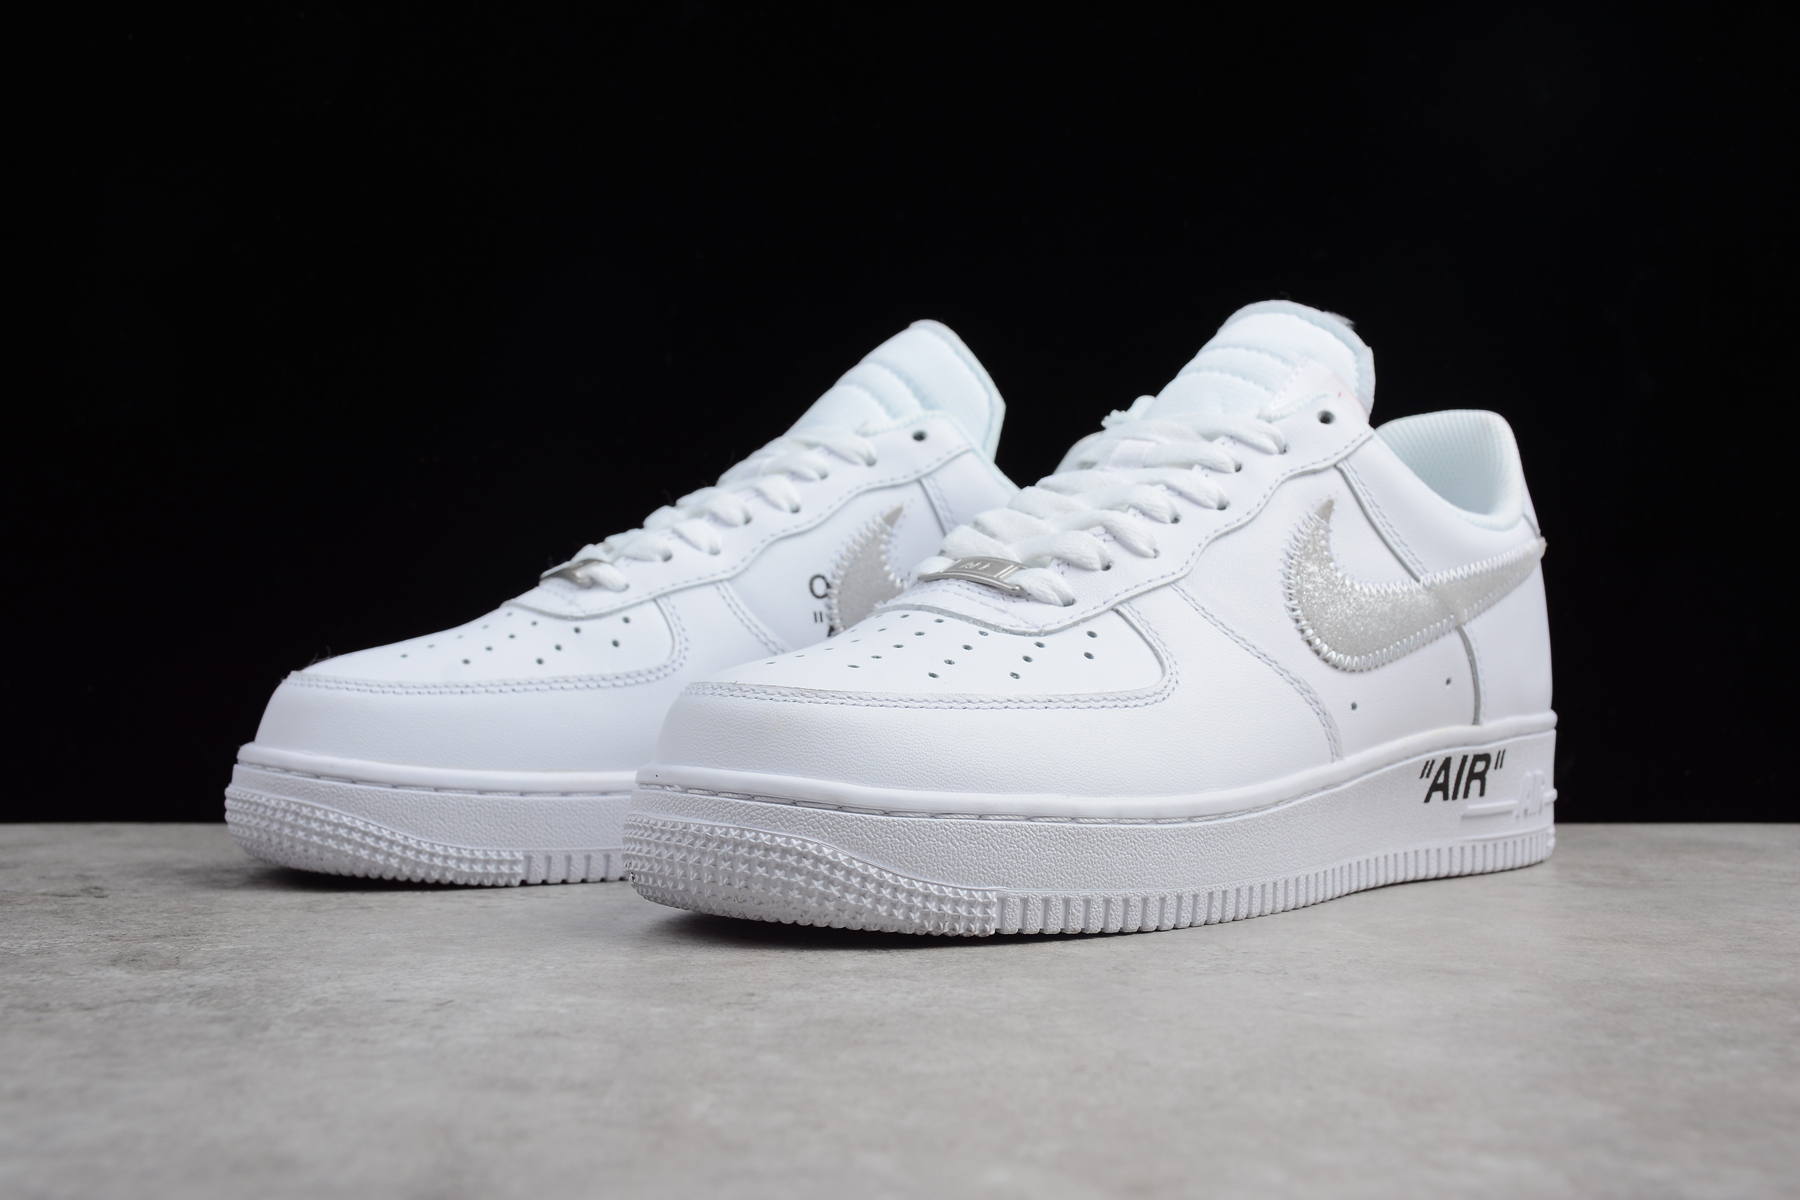 OFF WHITE x Nike Air Force 1 Low White Black Varsity Red